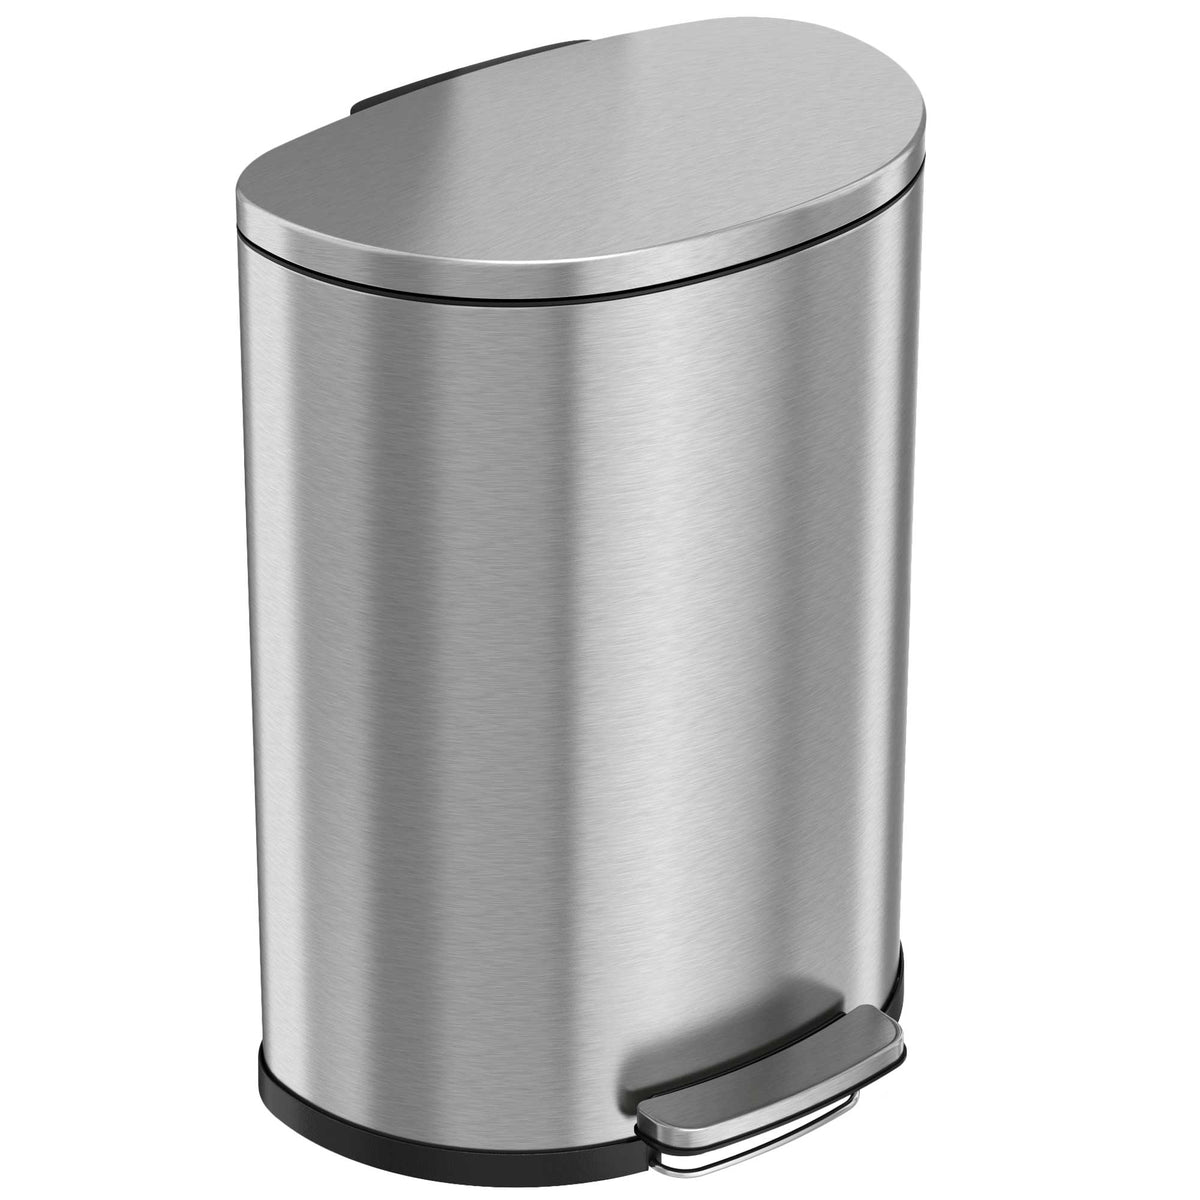 13 Gal/50 Liter Kitchen Trash Can with Lid, Tall Large Kitchen Trash Bin 13  Gallon Waste Bin, Stainless Steel Metal Garbage Can with Foot Pedal Odor